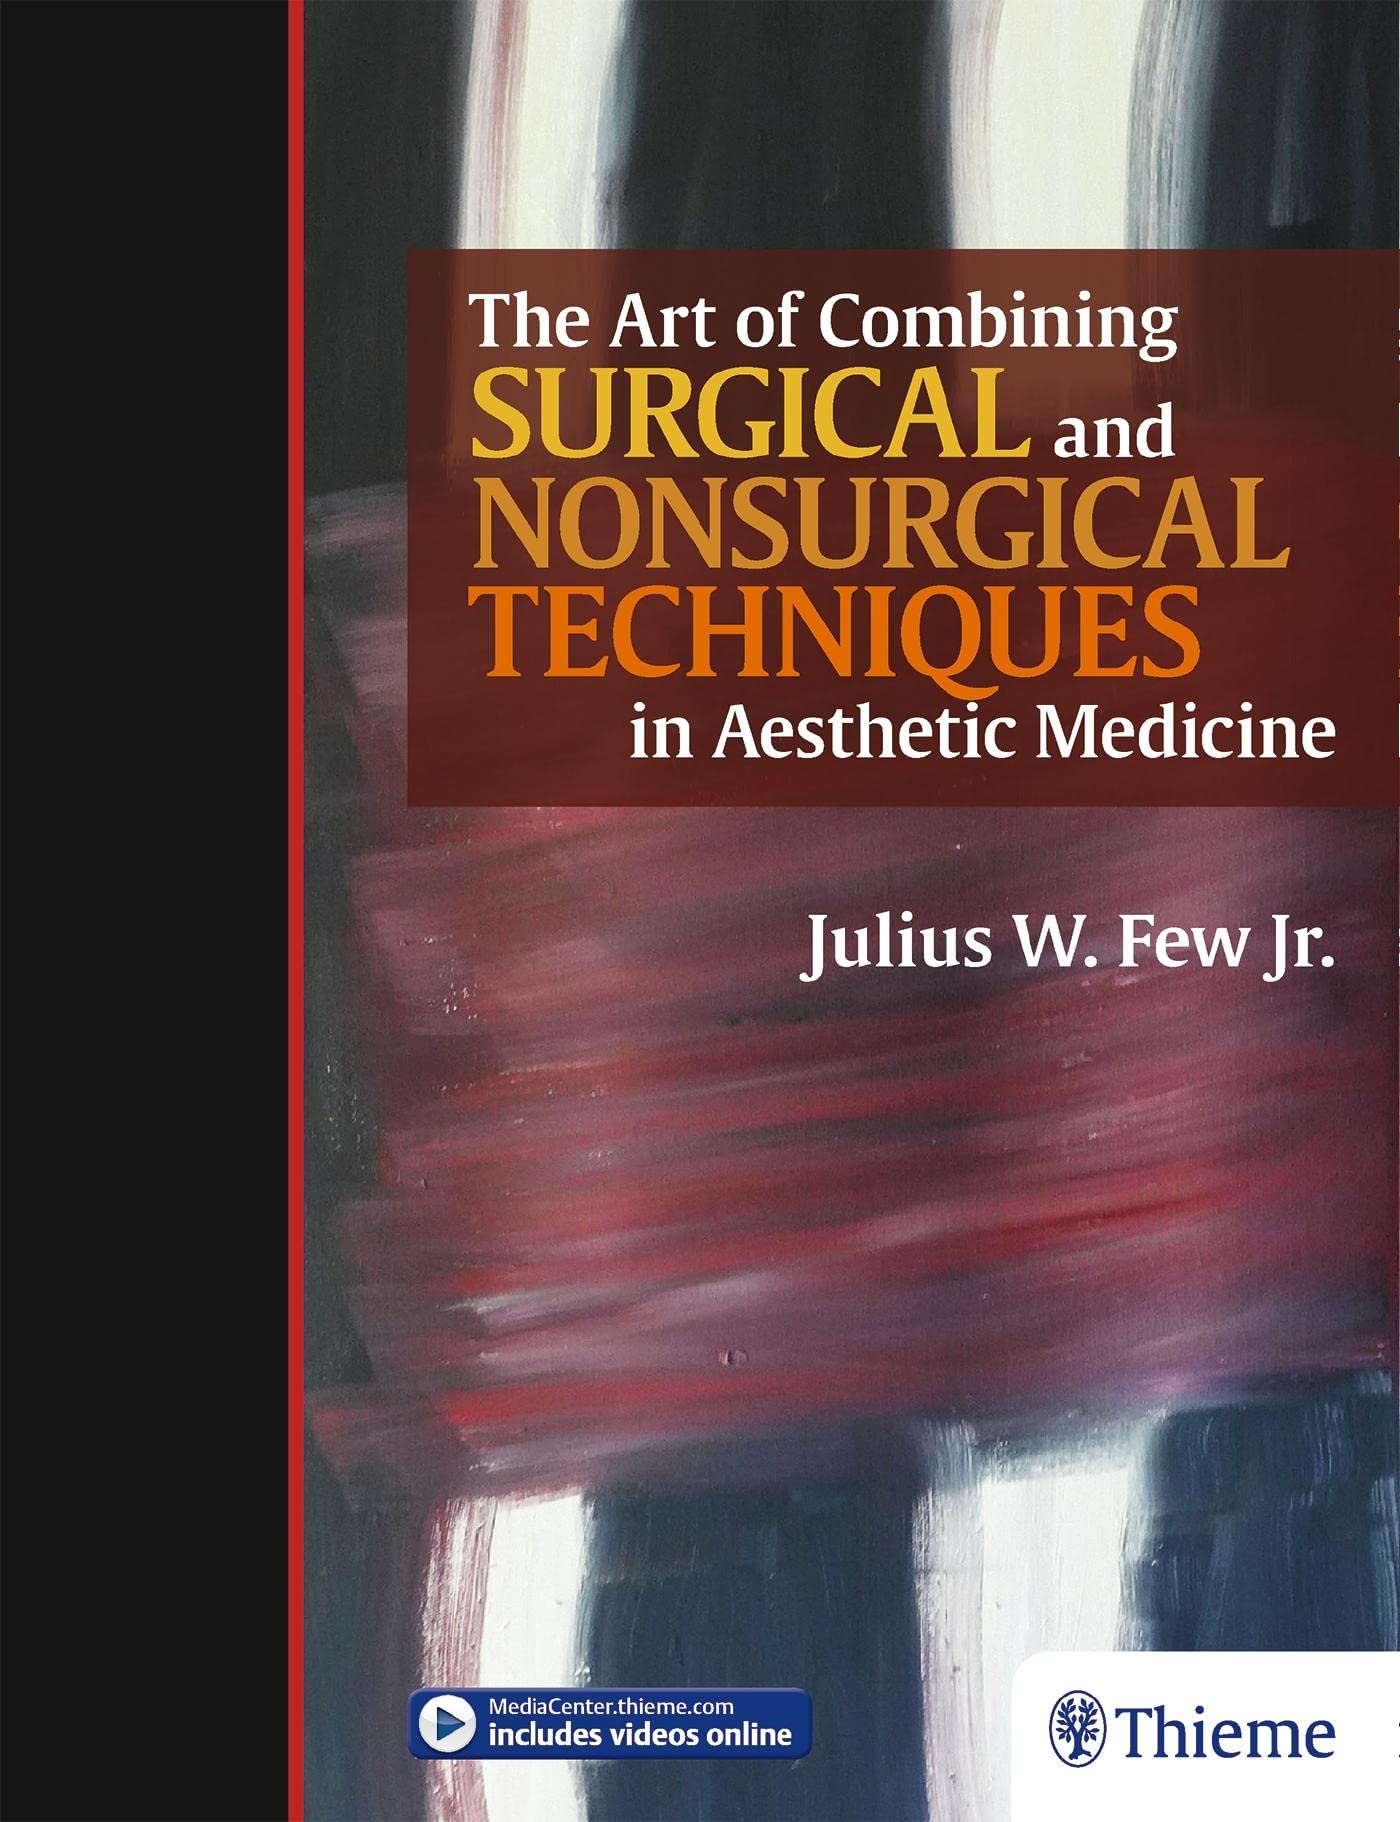 The Art of Combining Surgical and Nonsurgical Techniques in Aesthetic Medicine  by Julius W. Few Jr. 